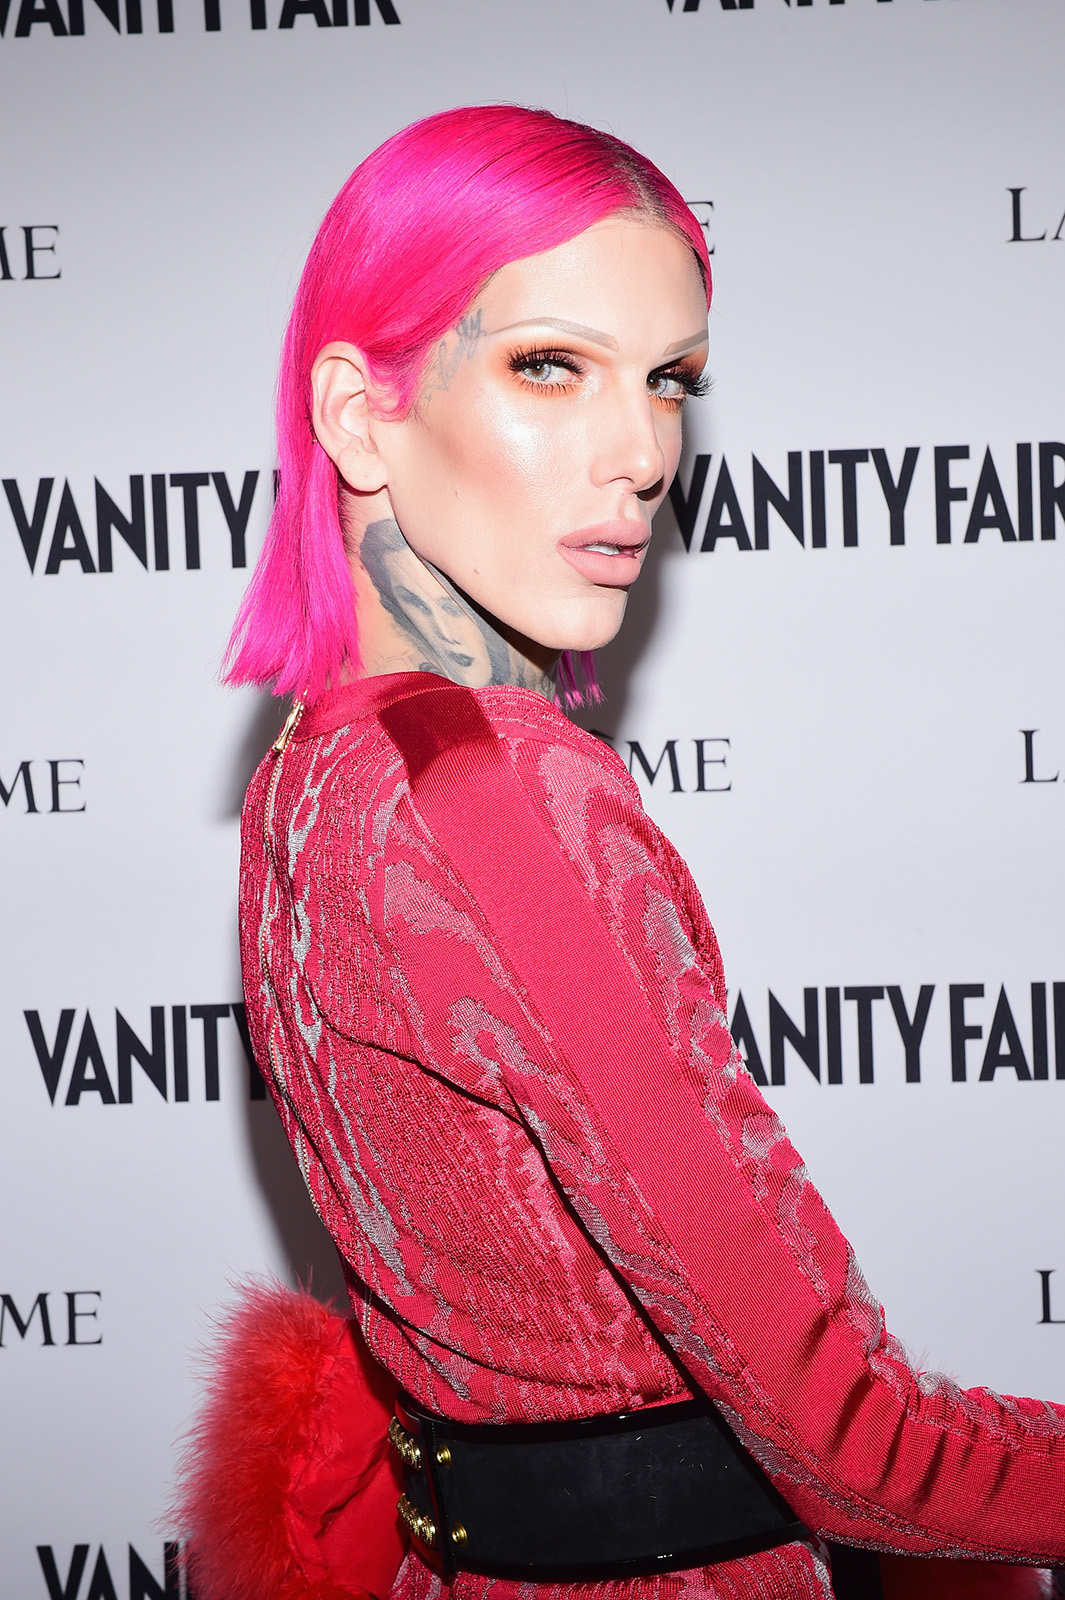 Jeffree Star seems untouchable, but will a sexual assault allegation finally hurt his sub count? Read more on the new allegations.